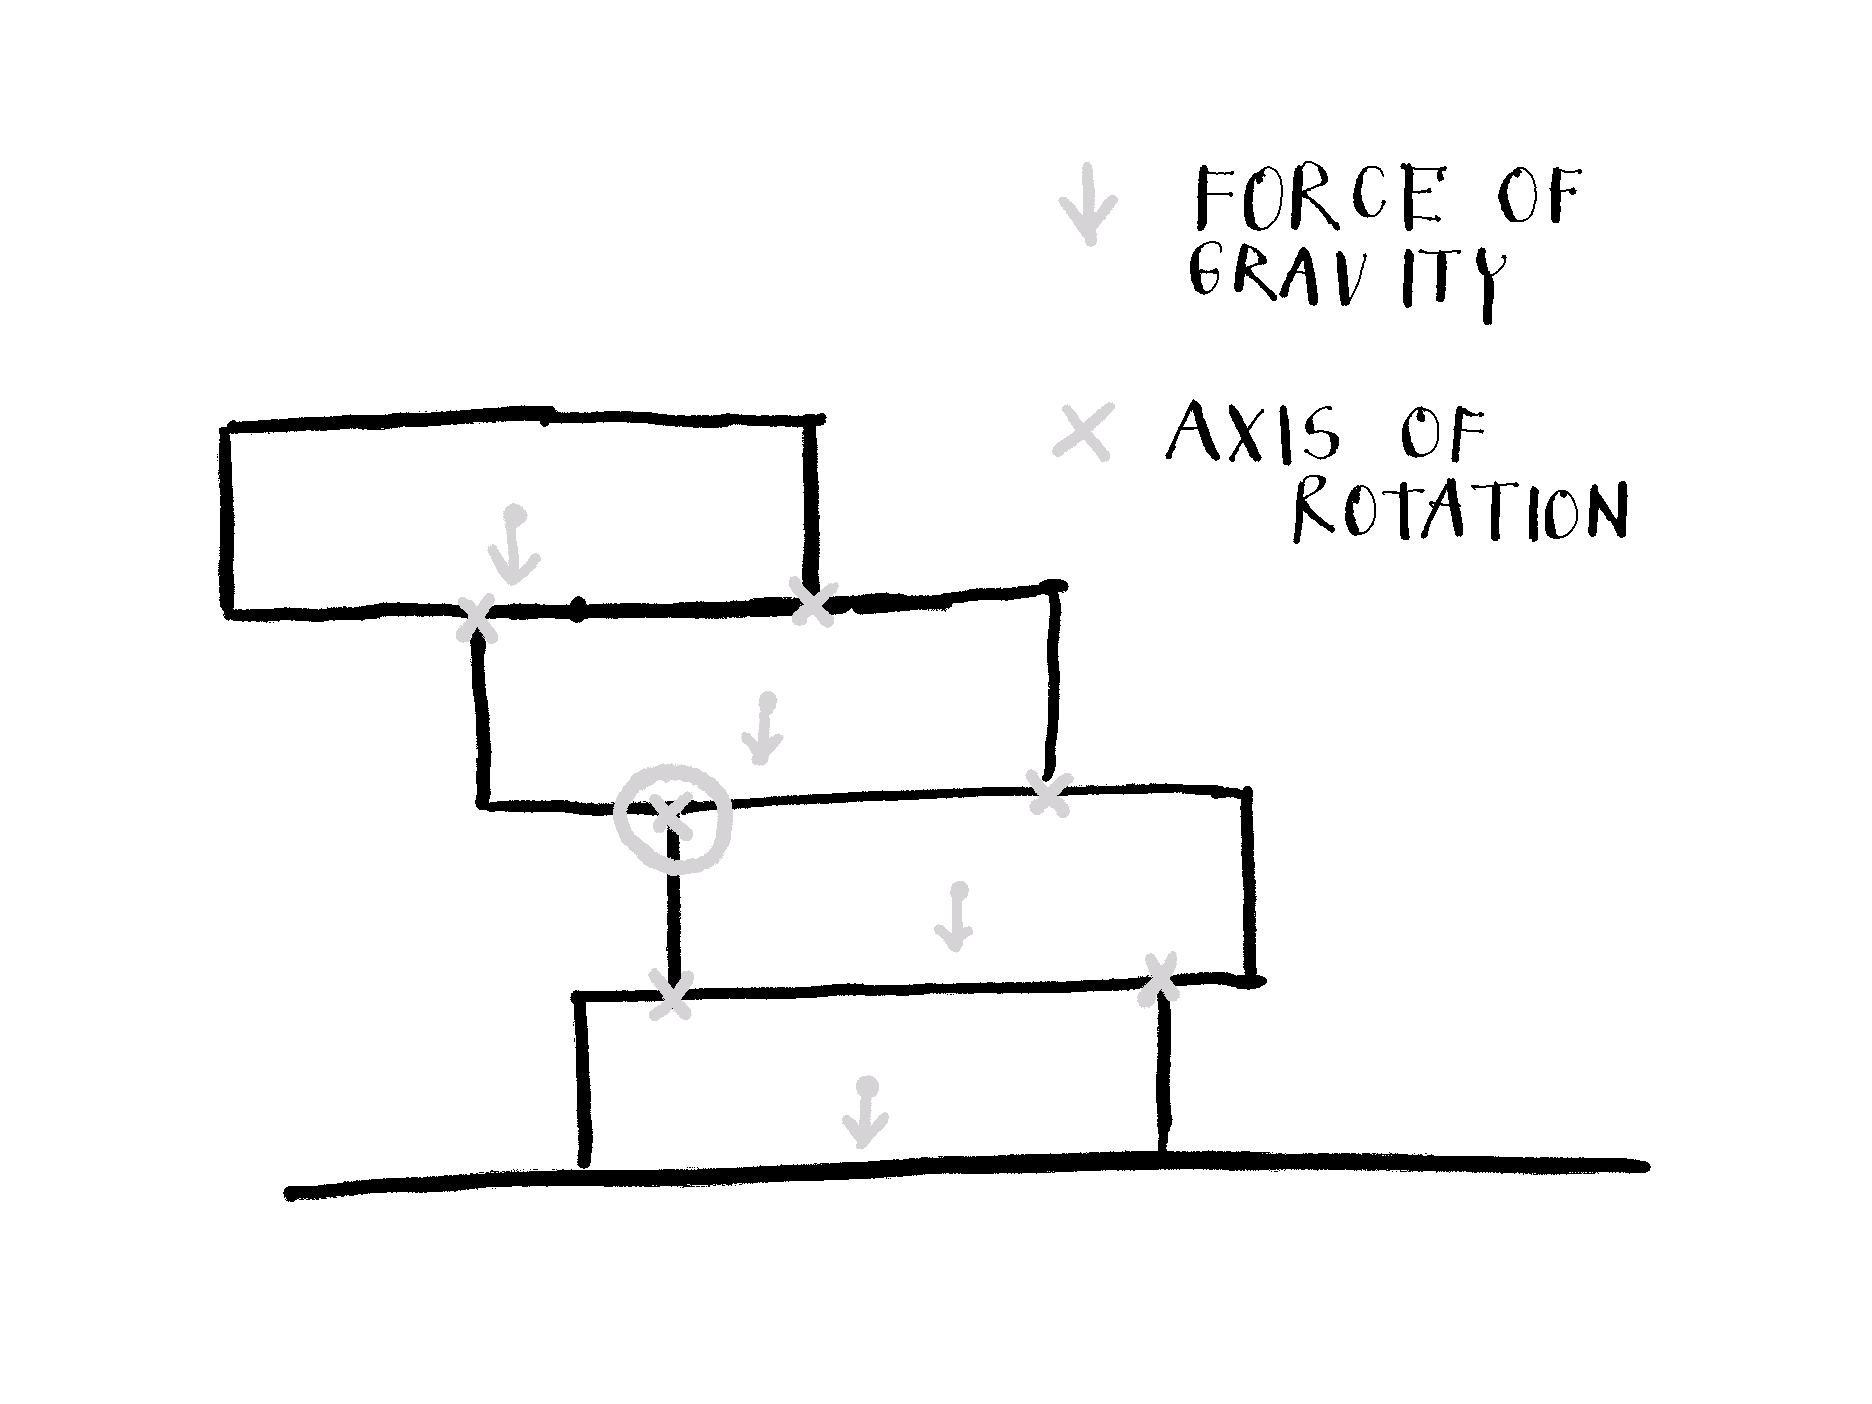 The Jenga tower with marked forces of gravity on blocks’ centers and potential axes of rotation.